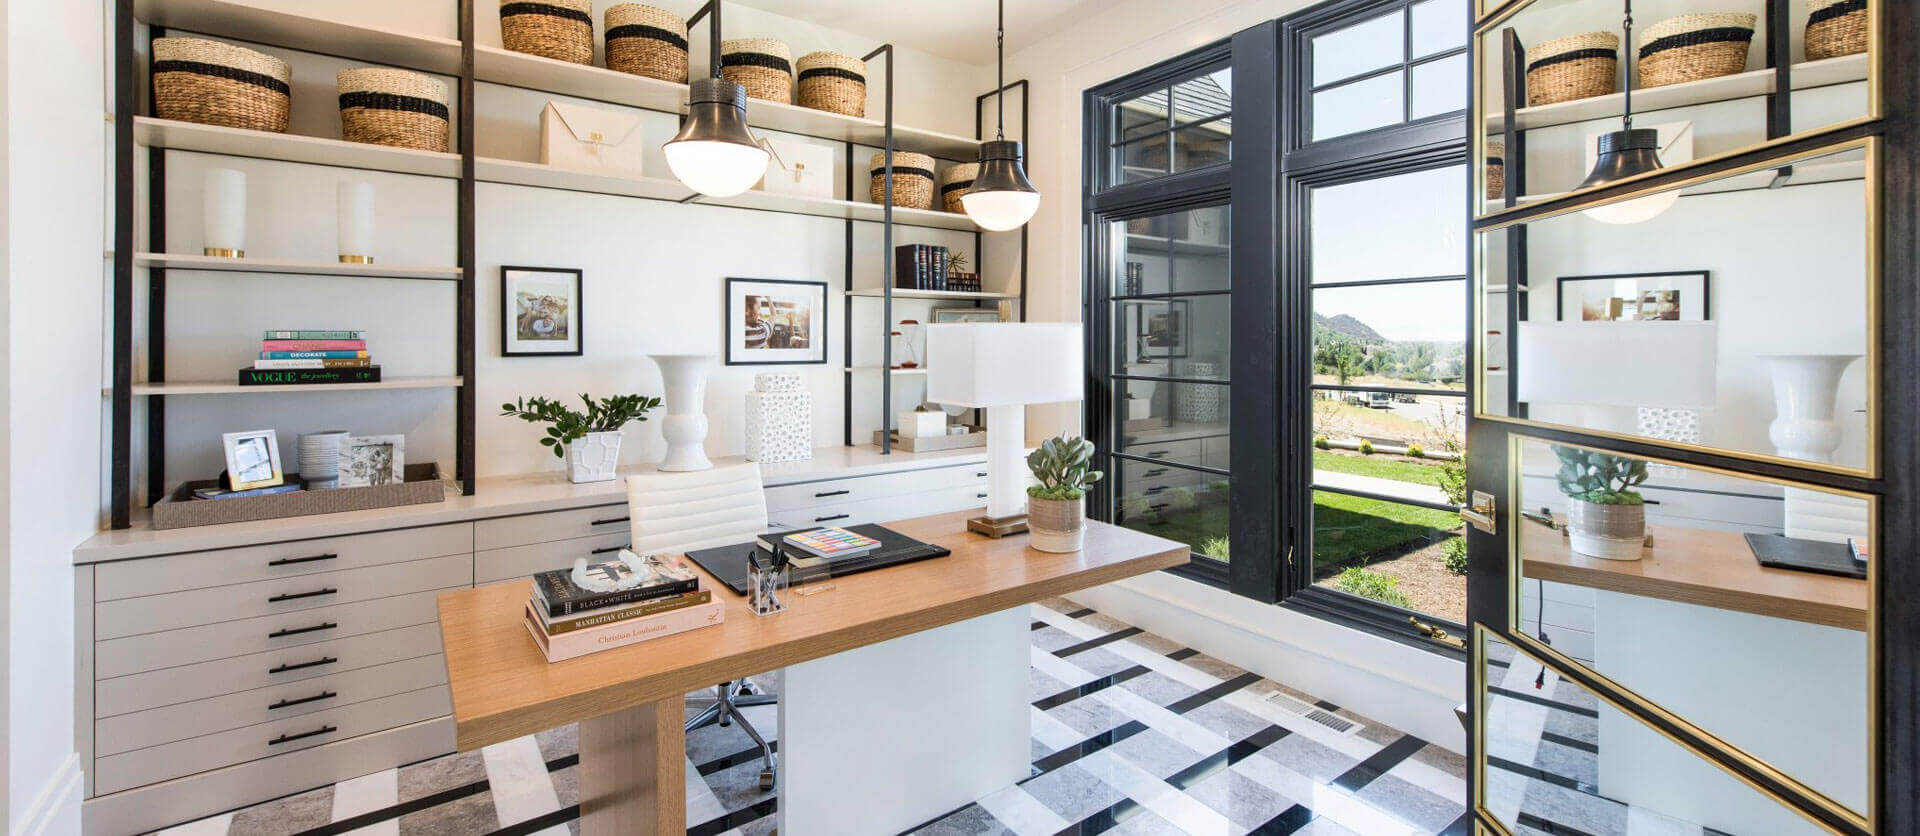 The sleek black 8-foot window is one of the leading design trends for room additions in Los Angeles.